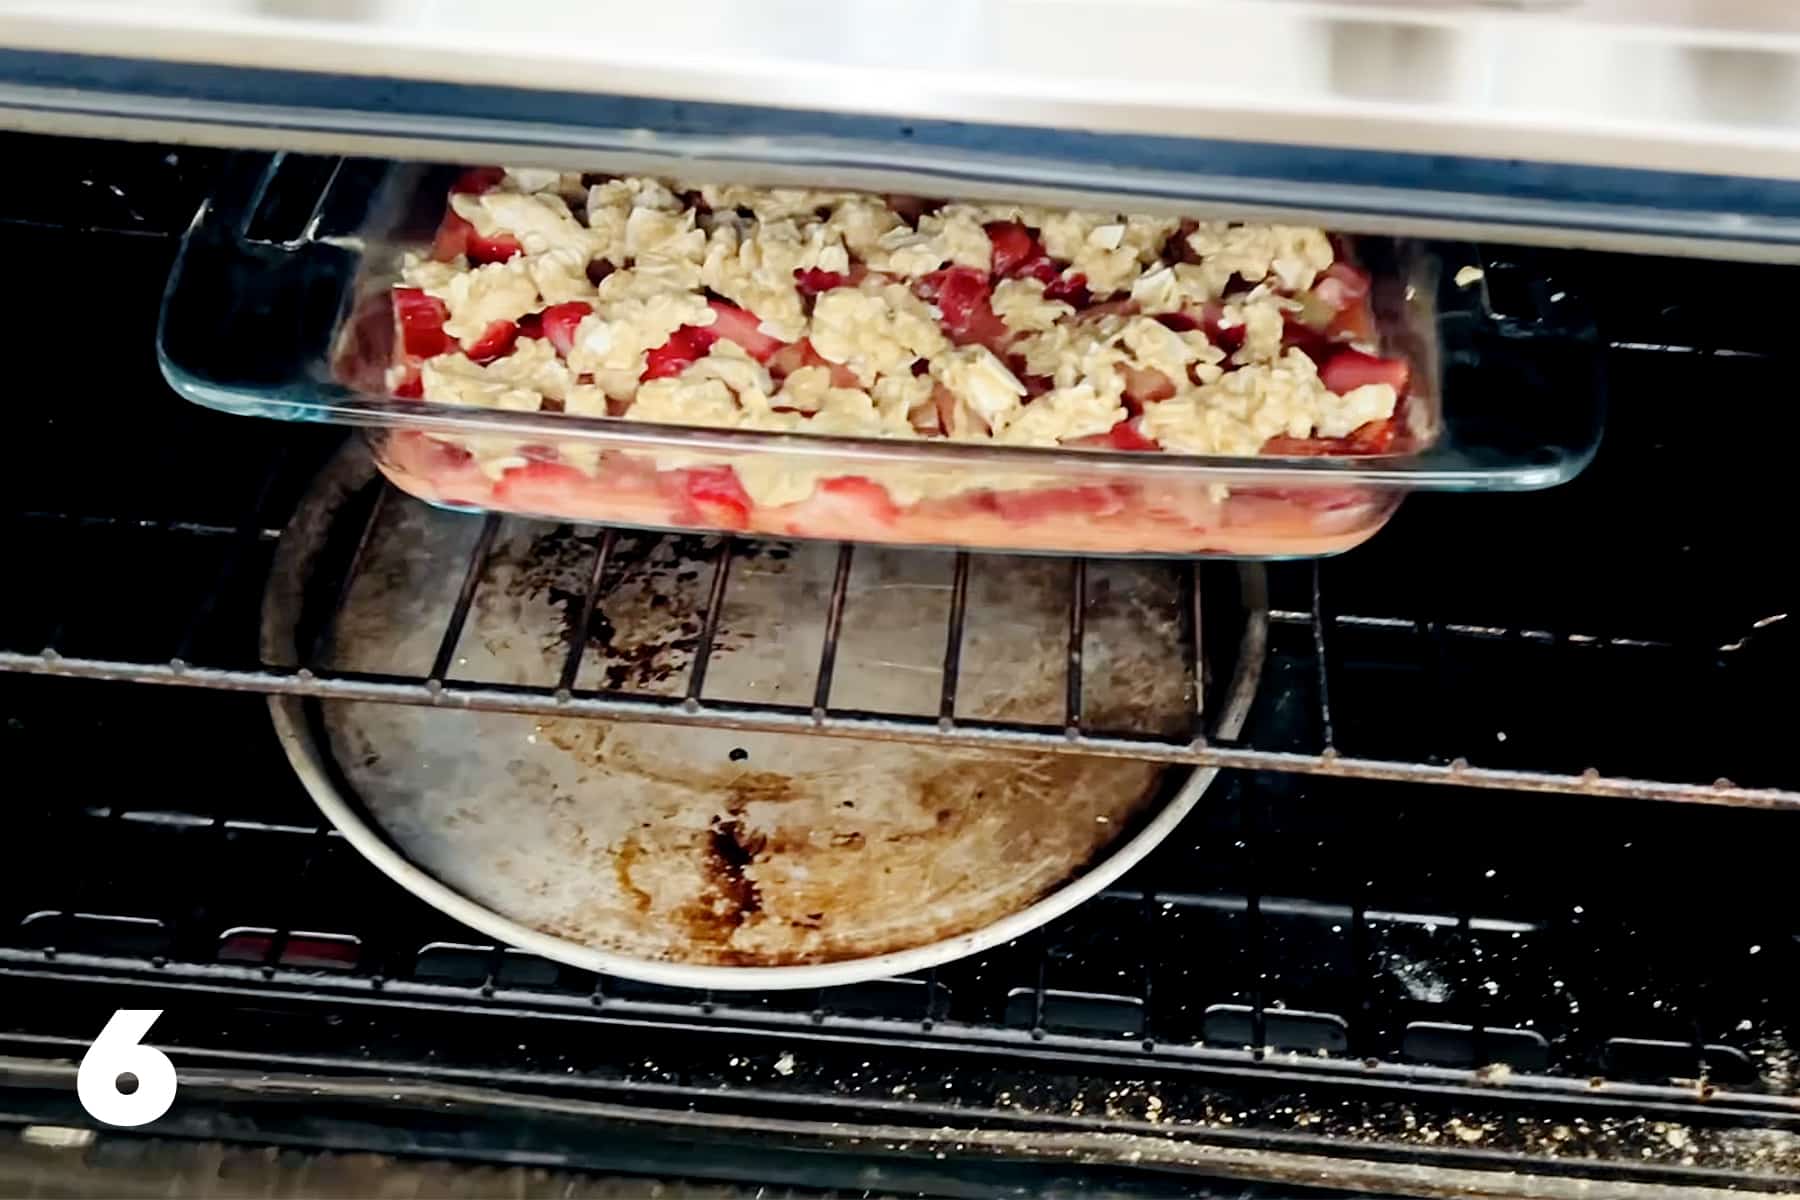 pan of gluten free strawberry rhubarb crisp in the oven